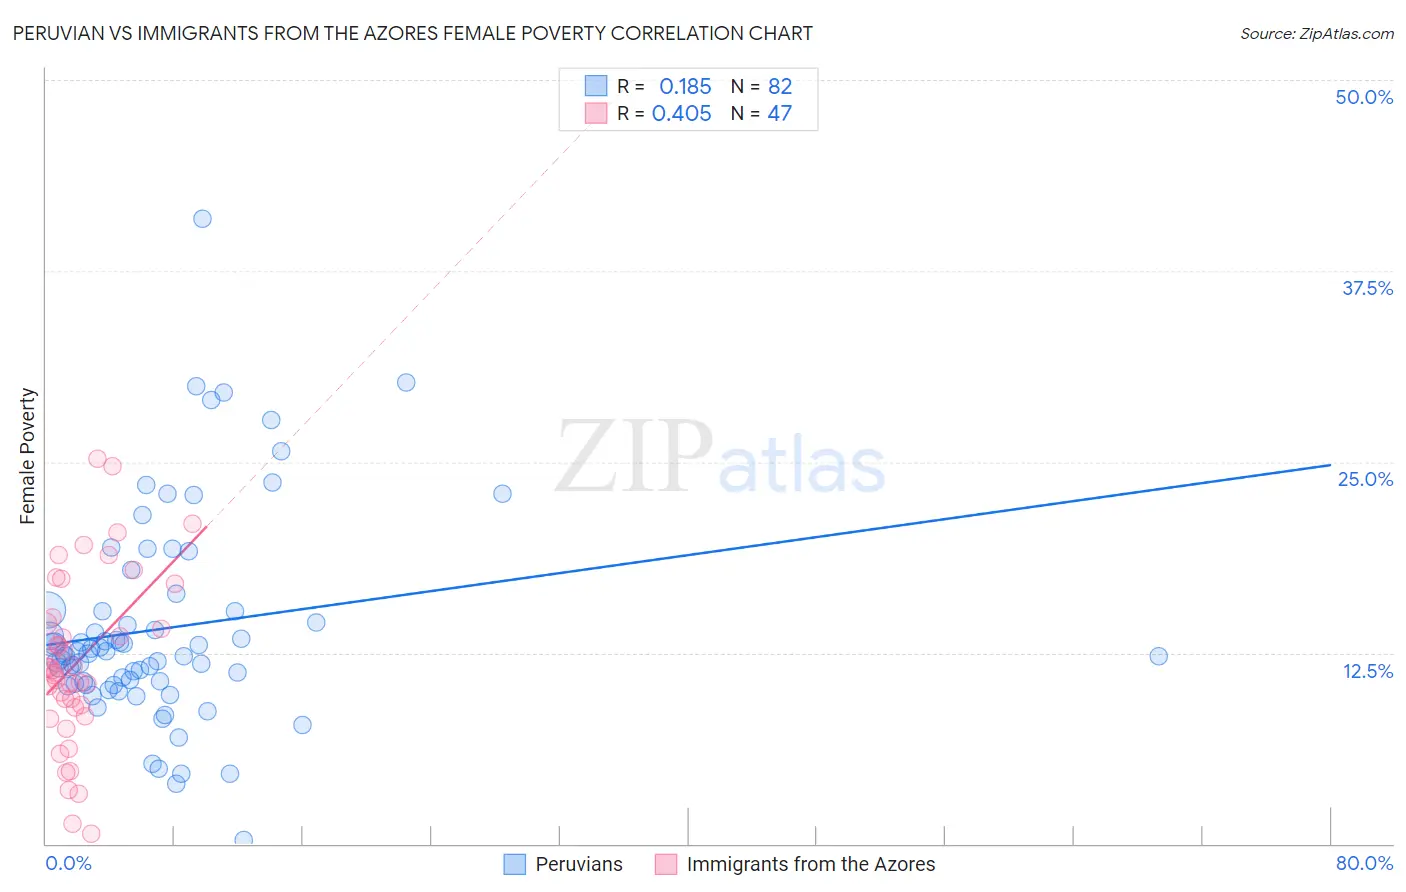 Peruvian vs Immigrants from the Azores Female Poverty